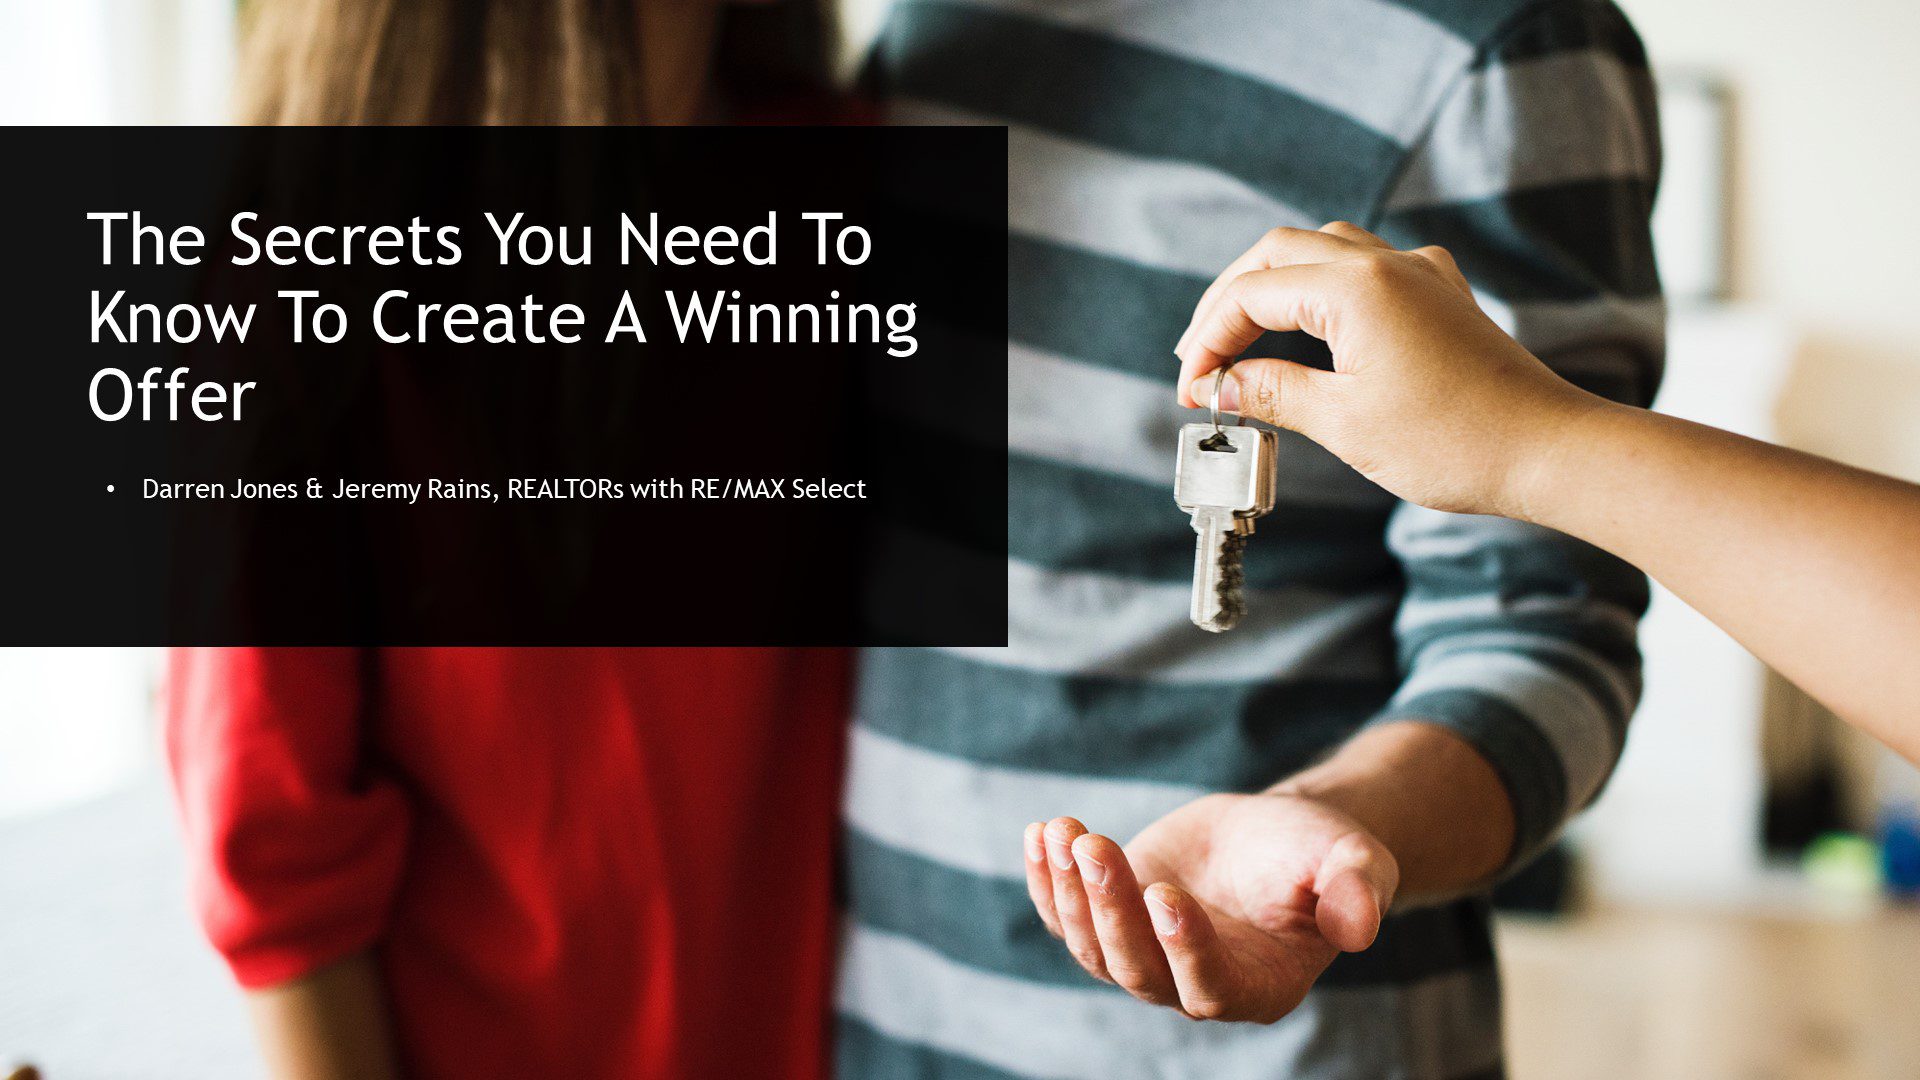 The Secrets You Need To Know To Create A Winning Offer